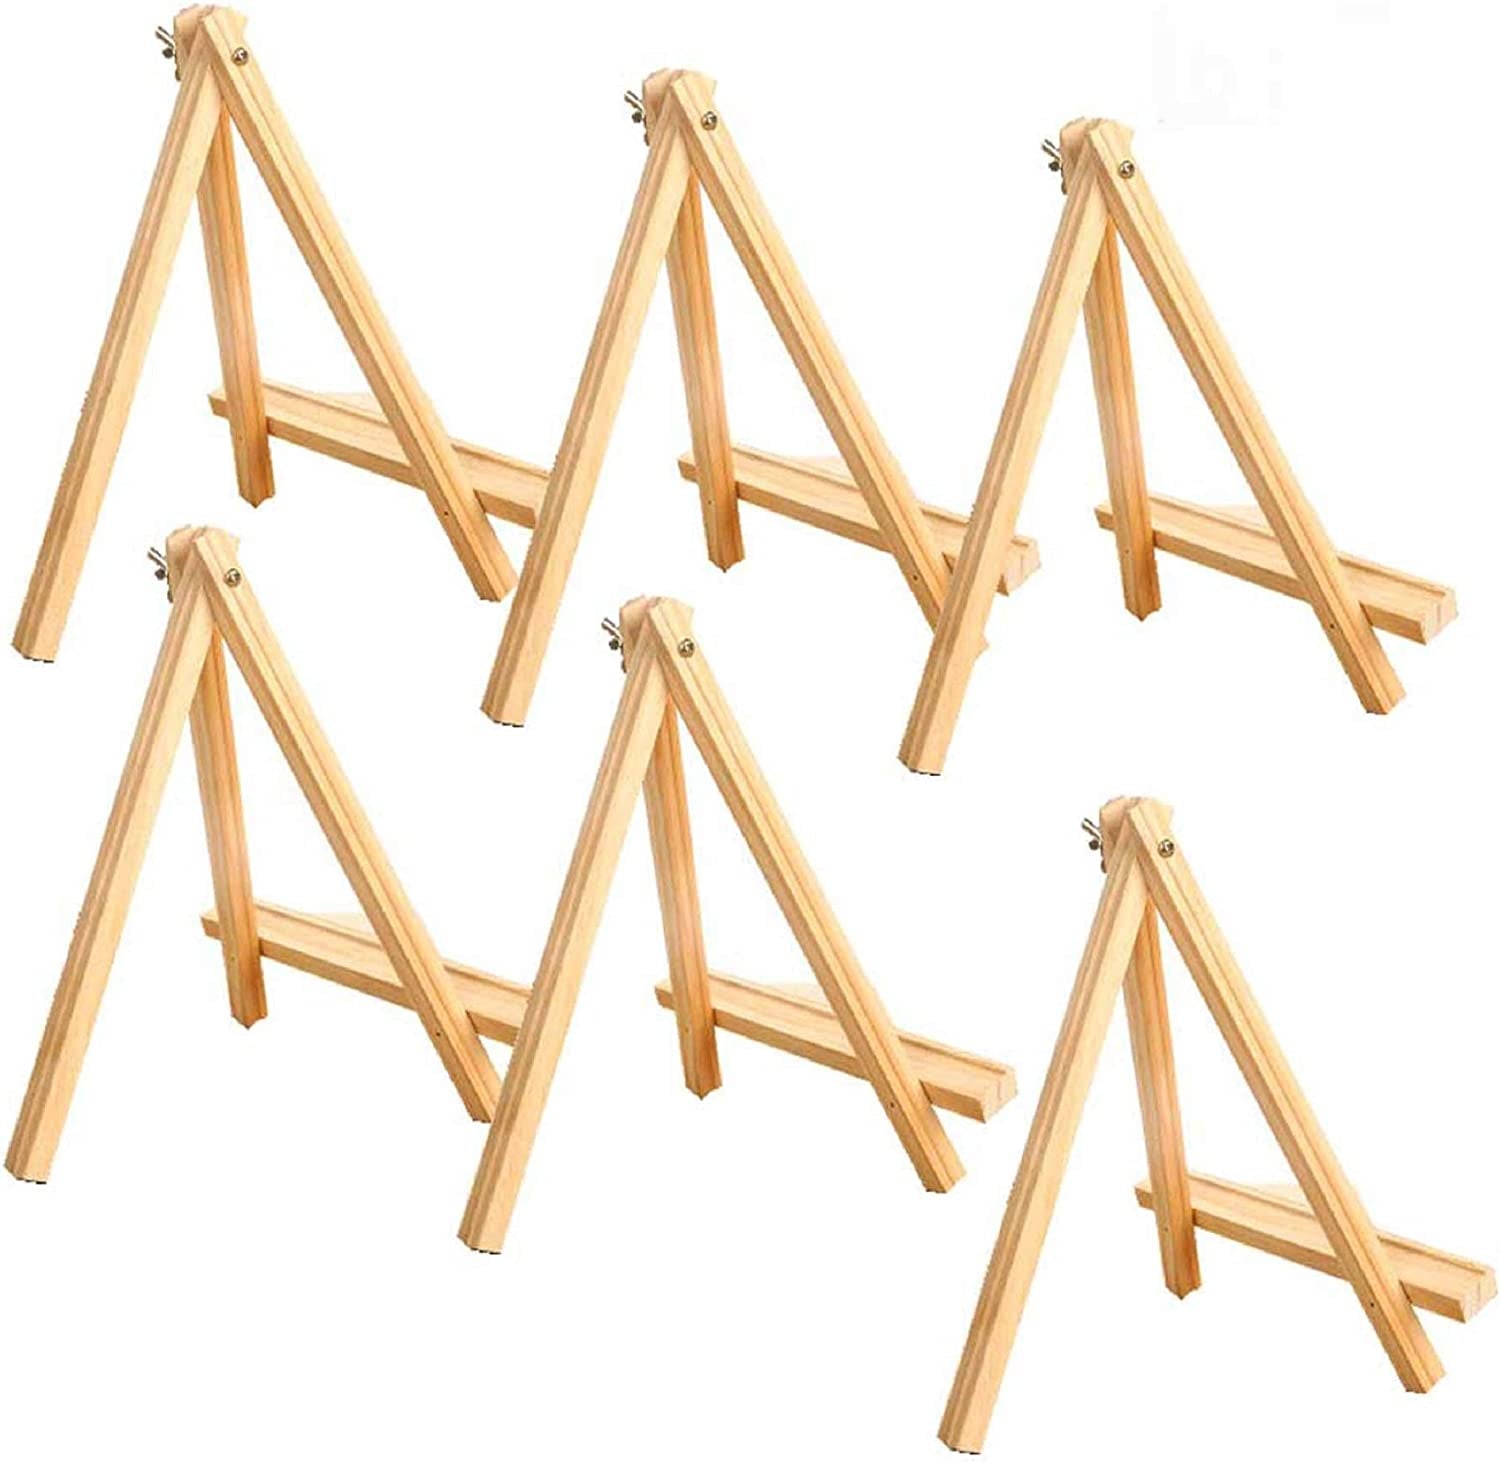  12 Pack 9 Inch Wood Easels, Easel Stand for Painting